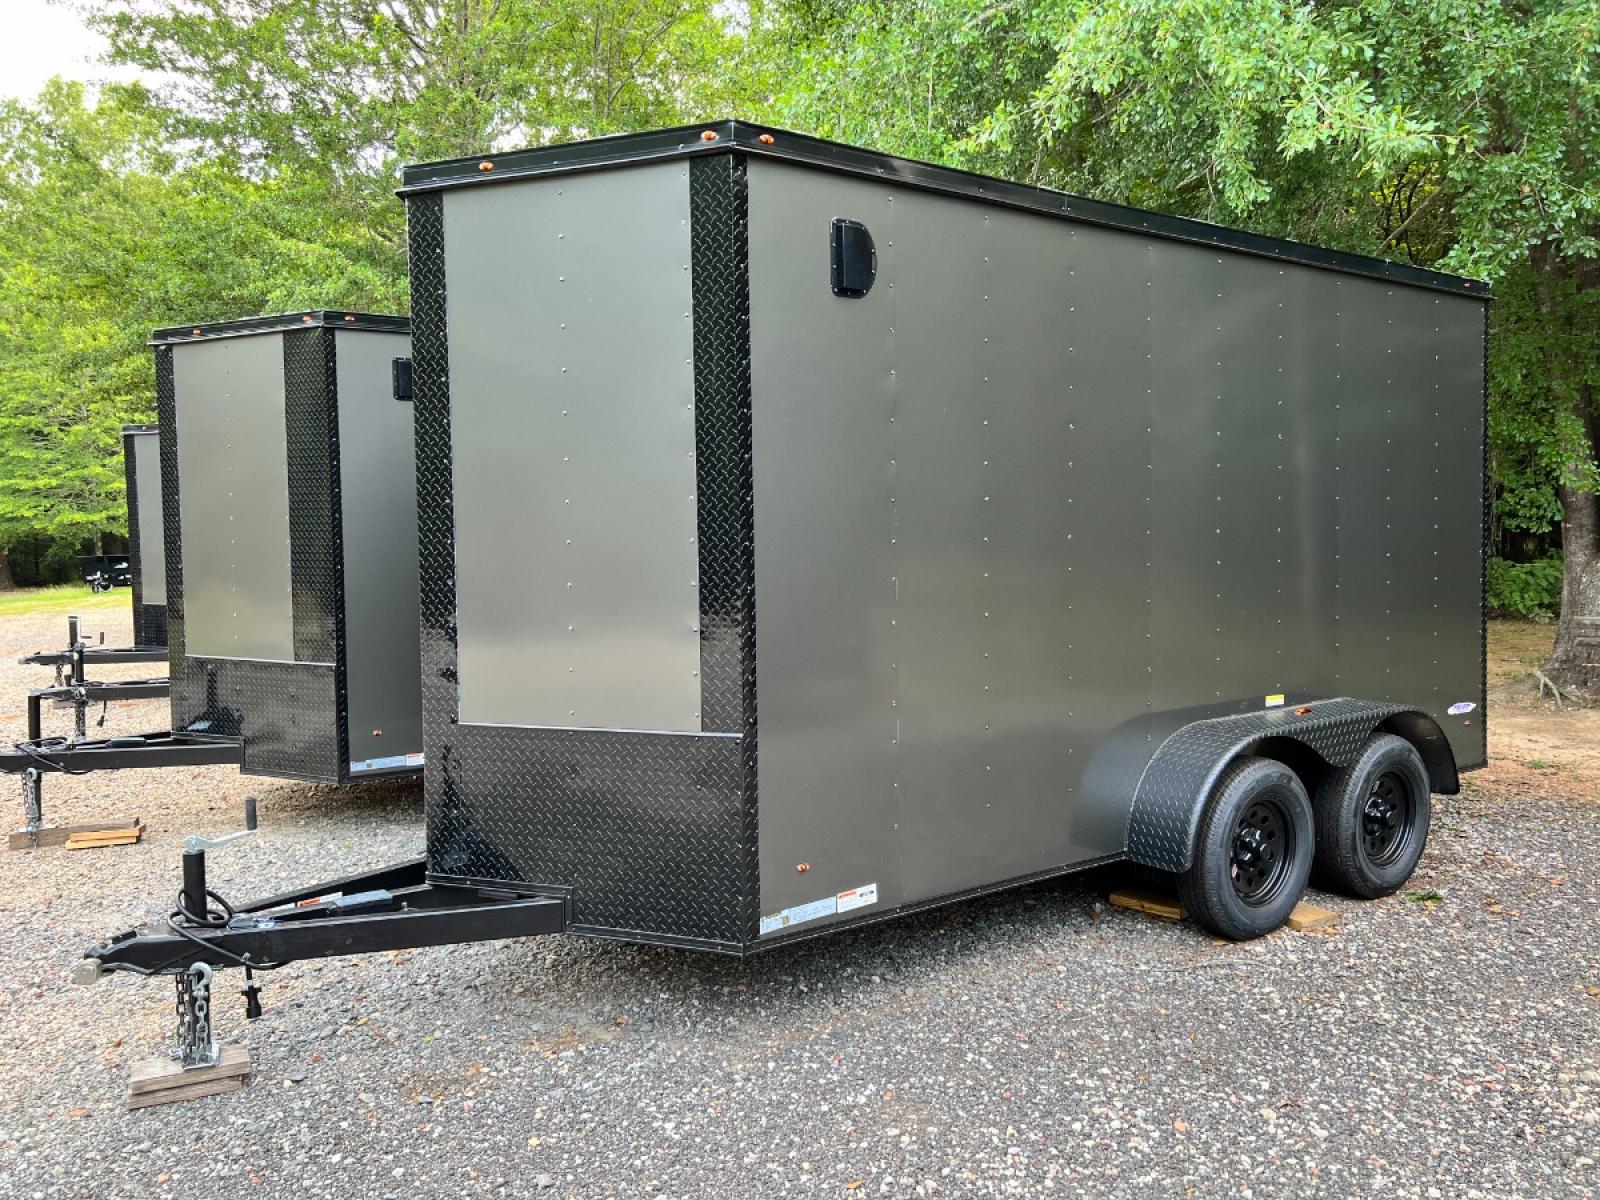 2023 Charcoal Metallic w/Black Out Pkg. Freedom Trailers 6ft X 14ft Tandem , located at 1330 Rainey Rd., Macon, 31220, (478) 960-1044, 32.845638, -83.778687 - Brand New 2023 "Top of the Line" Freedom Brand Trailer Made in South Ga. Compact Size, Great for Tools or Cycle's! Awesome 6ft X 14ft Tandem Enclosed Cycle Hauler & Cargo Trailer! Taller Inside Height is 7ft 2" Tall Inside & the Ramp Door Clearance is 6ft 8" at the Back! .080 Thick Metallic - Photo #17